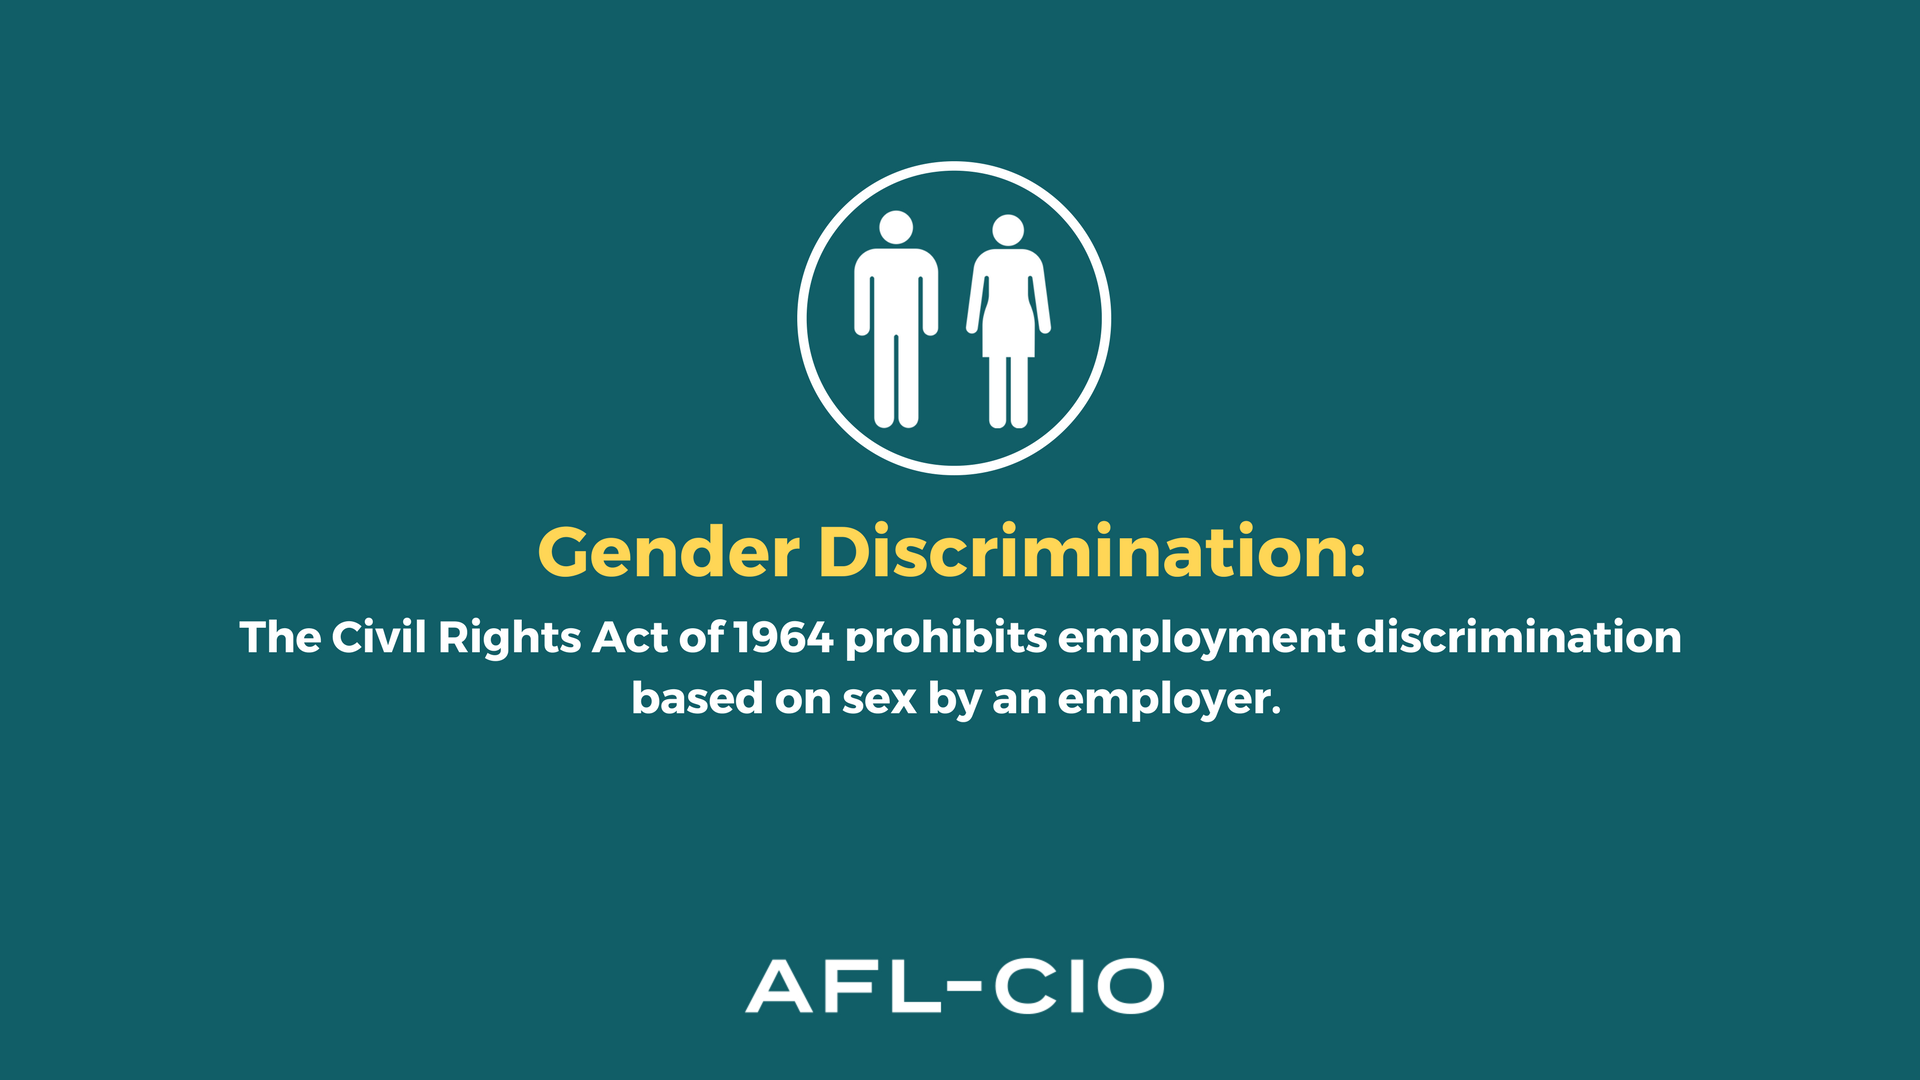 Gender Discrimination: The Civil Rights Act of 1964 prohibits employment discrimination based on sex by an employer.